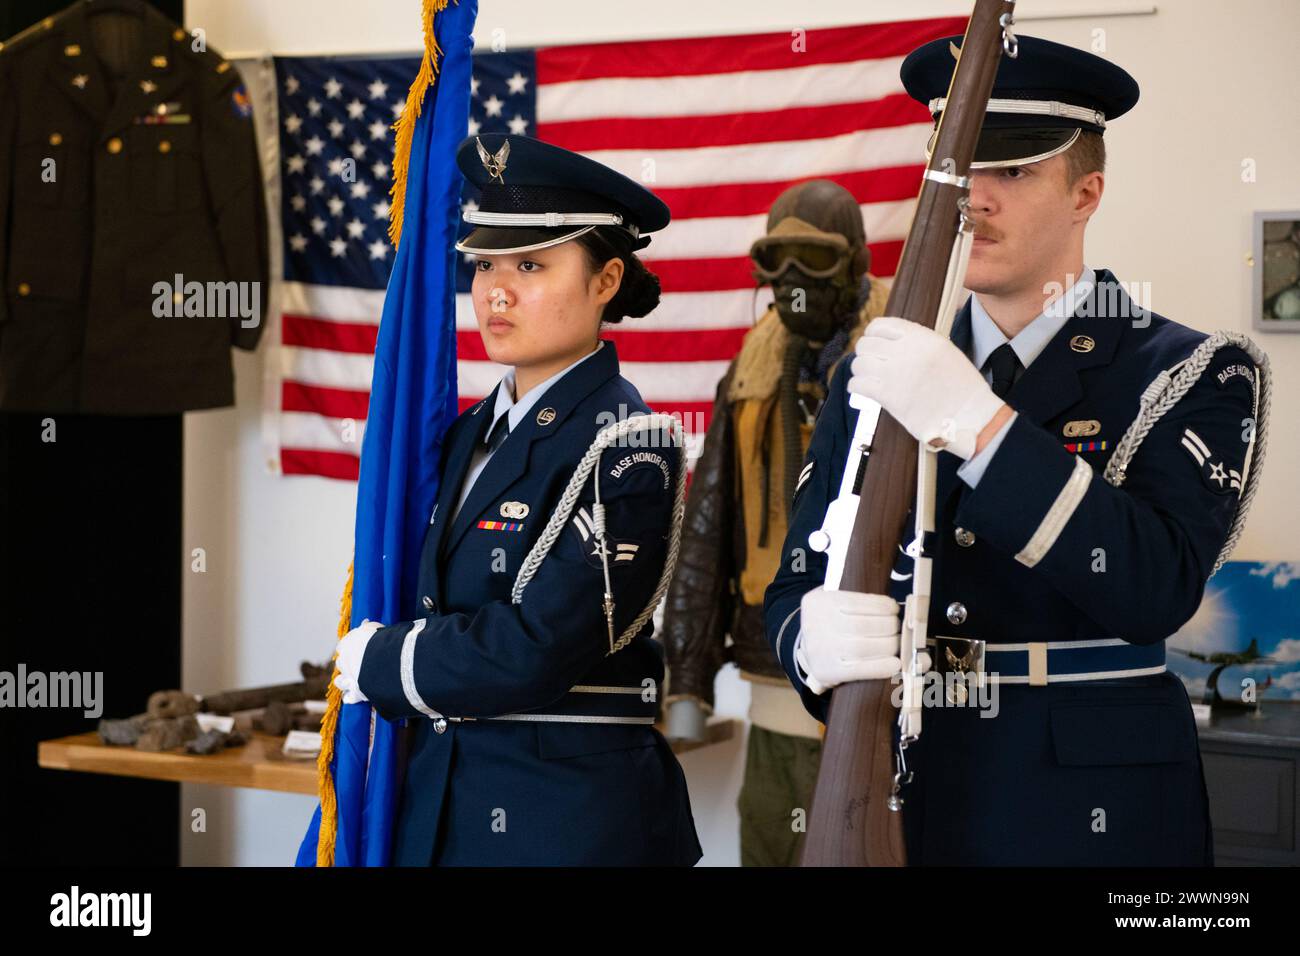 U.S. Air Force Airmen 1st Class Christina Selkor, left, and Spencer Eagan, right, 501st Combat Support Wing Honor Guard team members, present the colors during a Ceremony of Remembrance at Stanwick Lakes, England, Feb. 22, 2024. U.S. and U.K. leaders gathered to honor 17 Airmen who died in a midair collision on Feb. 22, 1944, involving B-17 Flying Fortresses from the 303rd Bombardment Group at RAF Molesworth and the 384th Bombardment Group at RAF Grafton Underwood. The Airmen were part of Operation Argument, or 'The Big Week,' targeting enemy industrial sites and aircraft facilities in Central Stock Photo